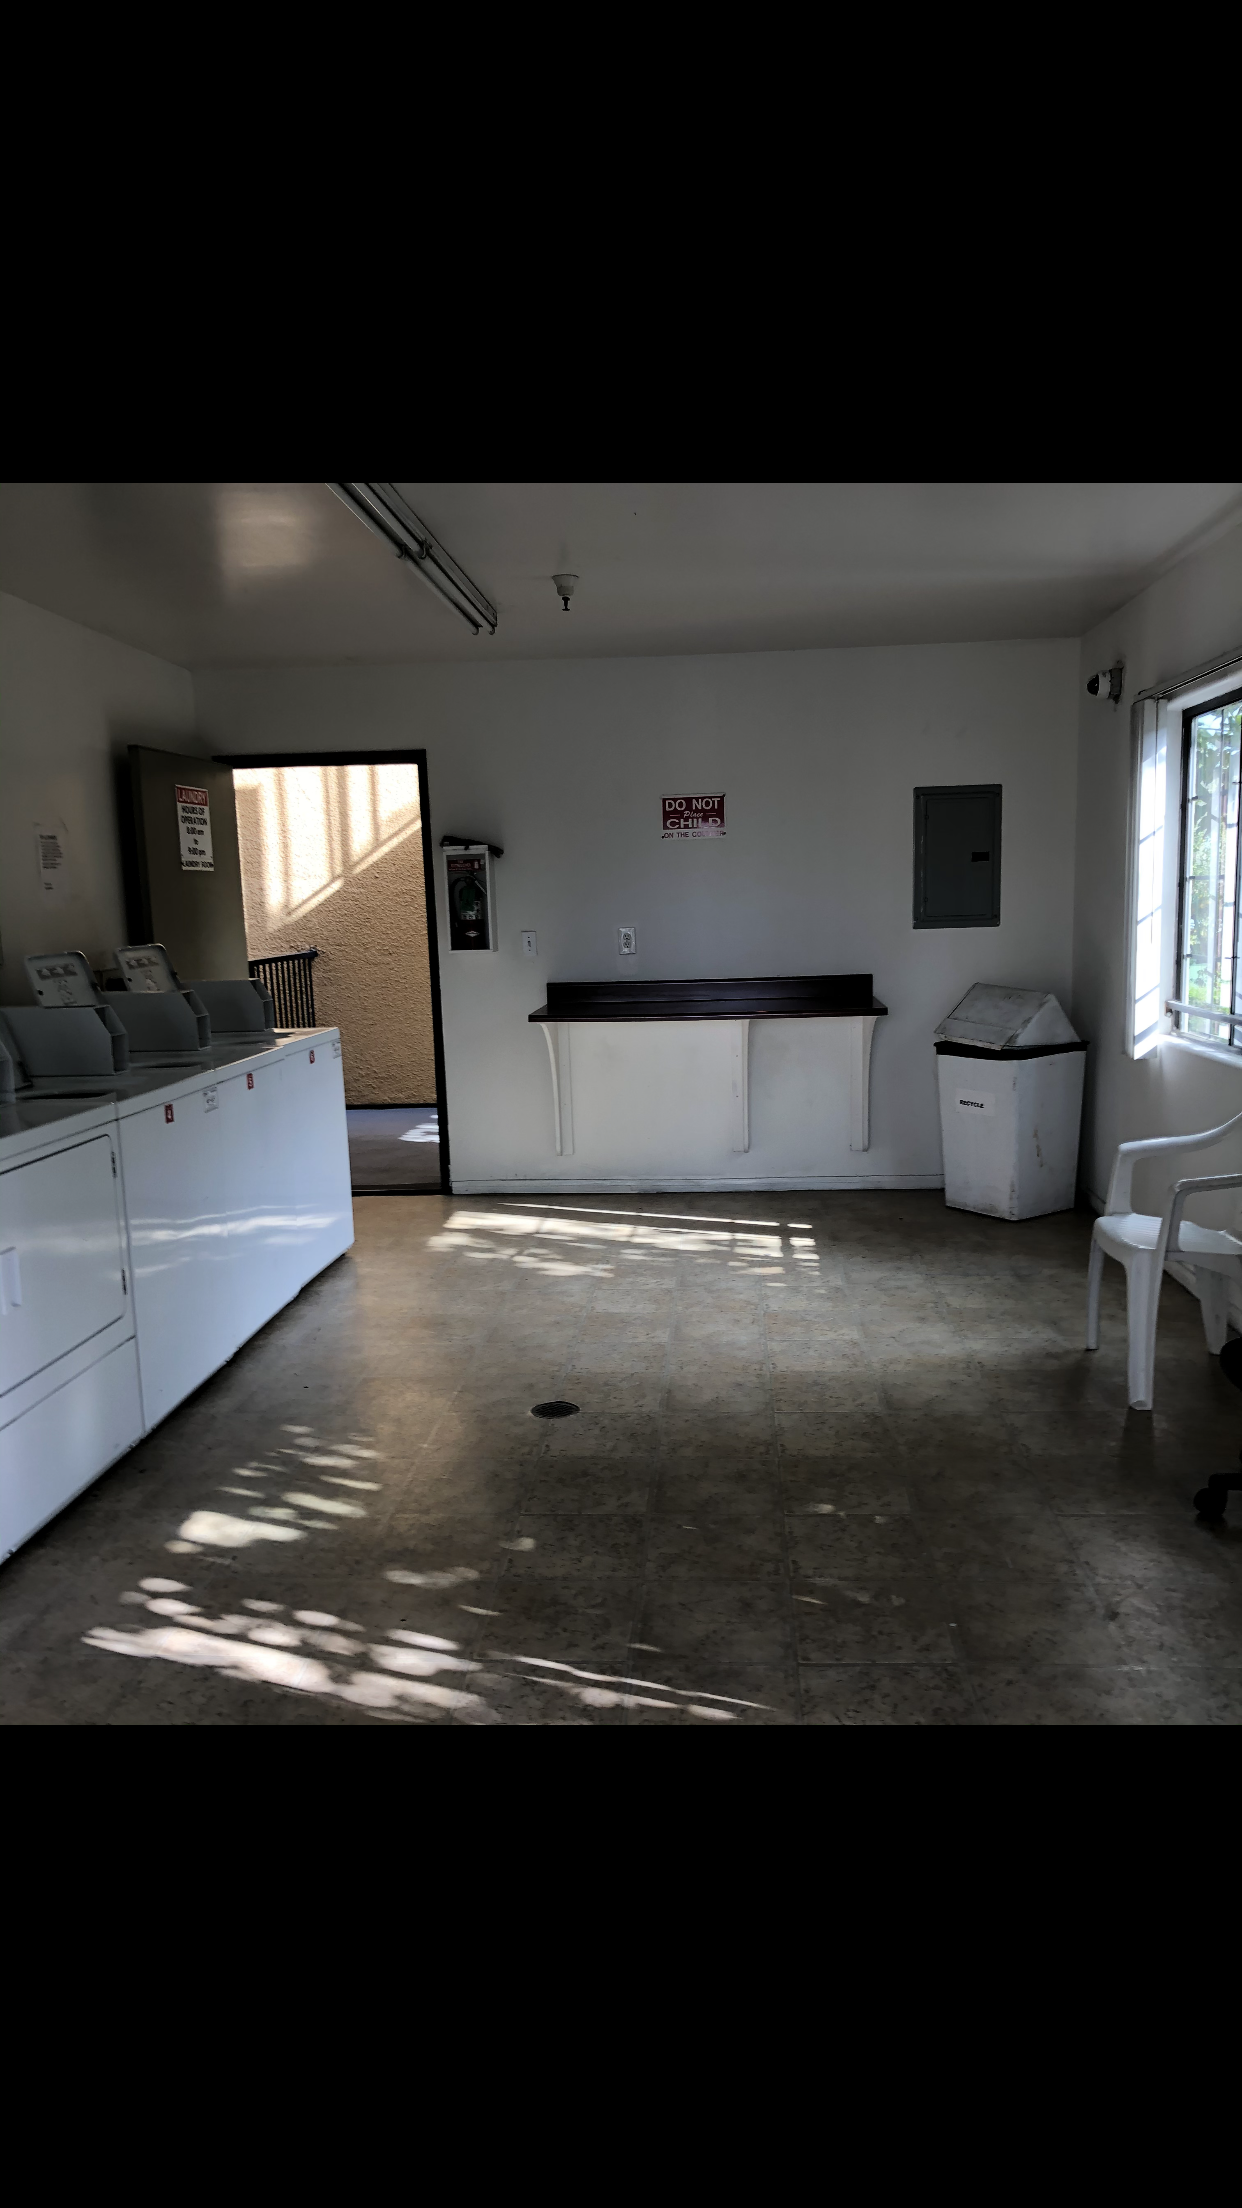 Inside of Building - Laundry Room